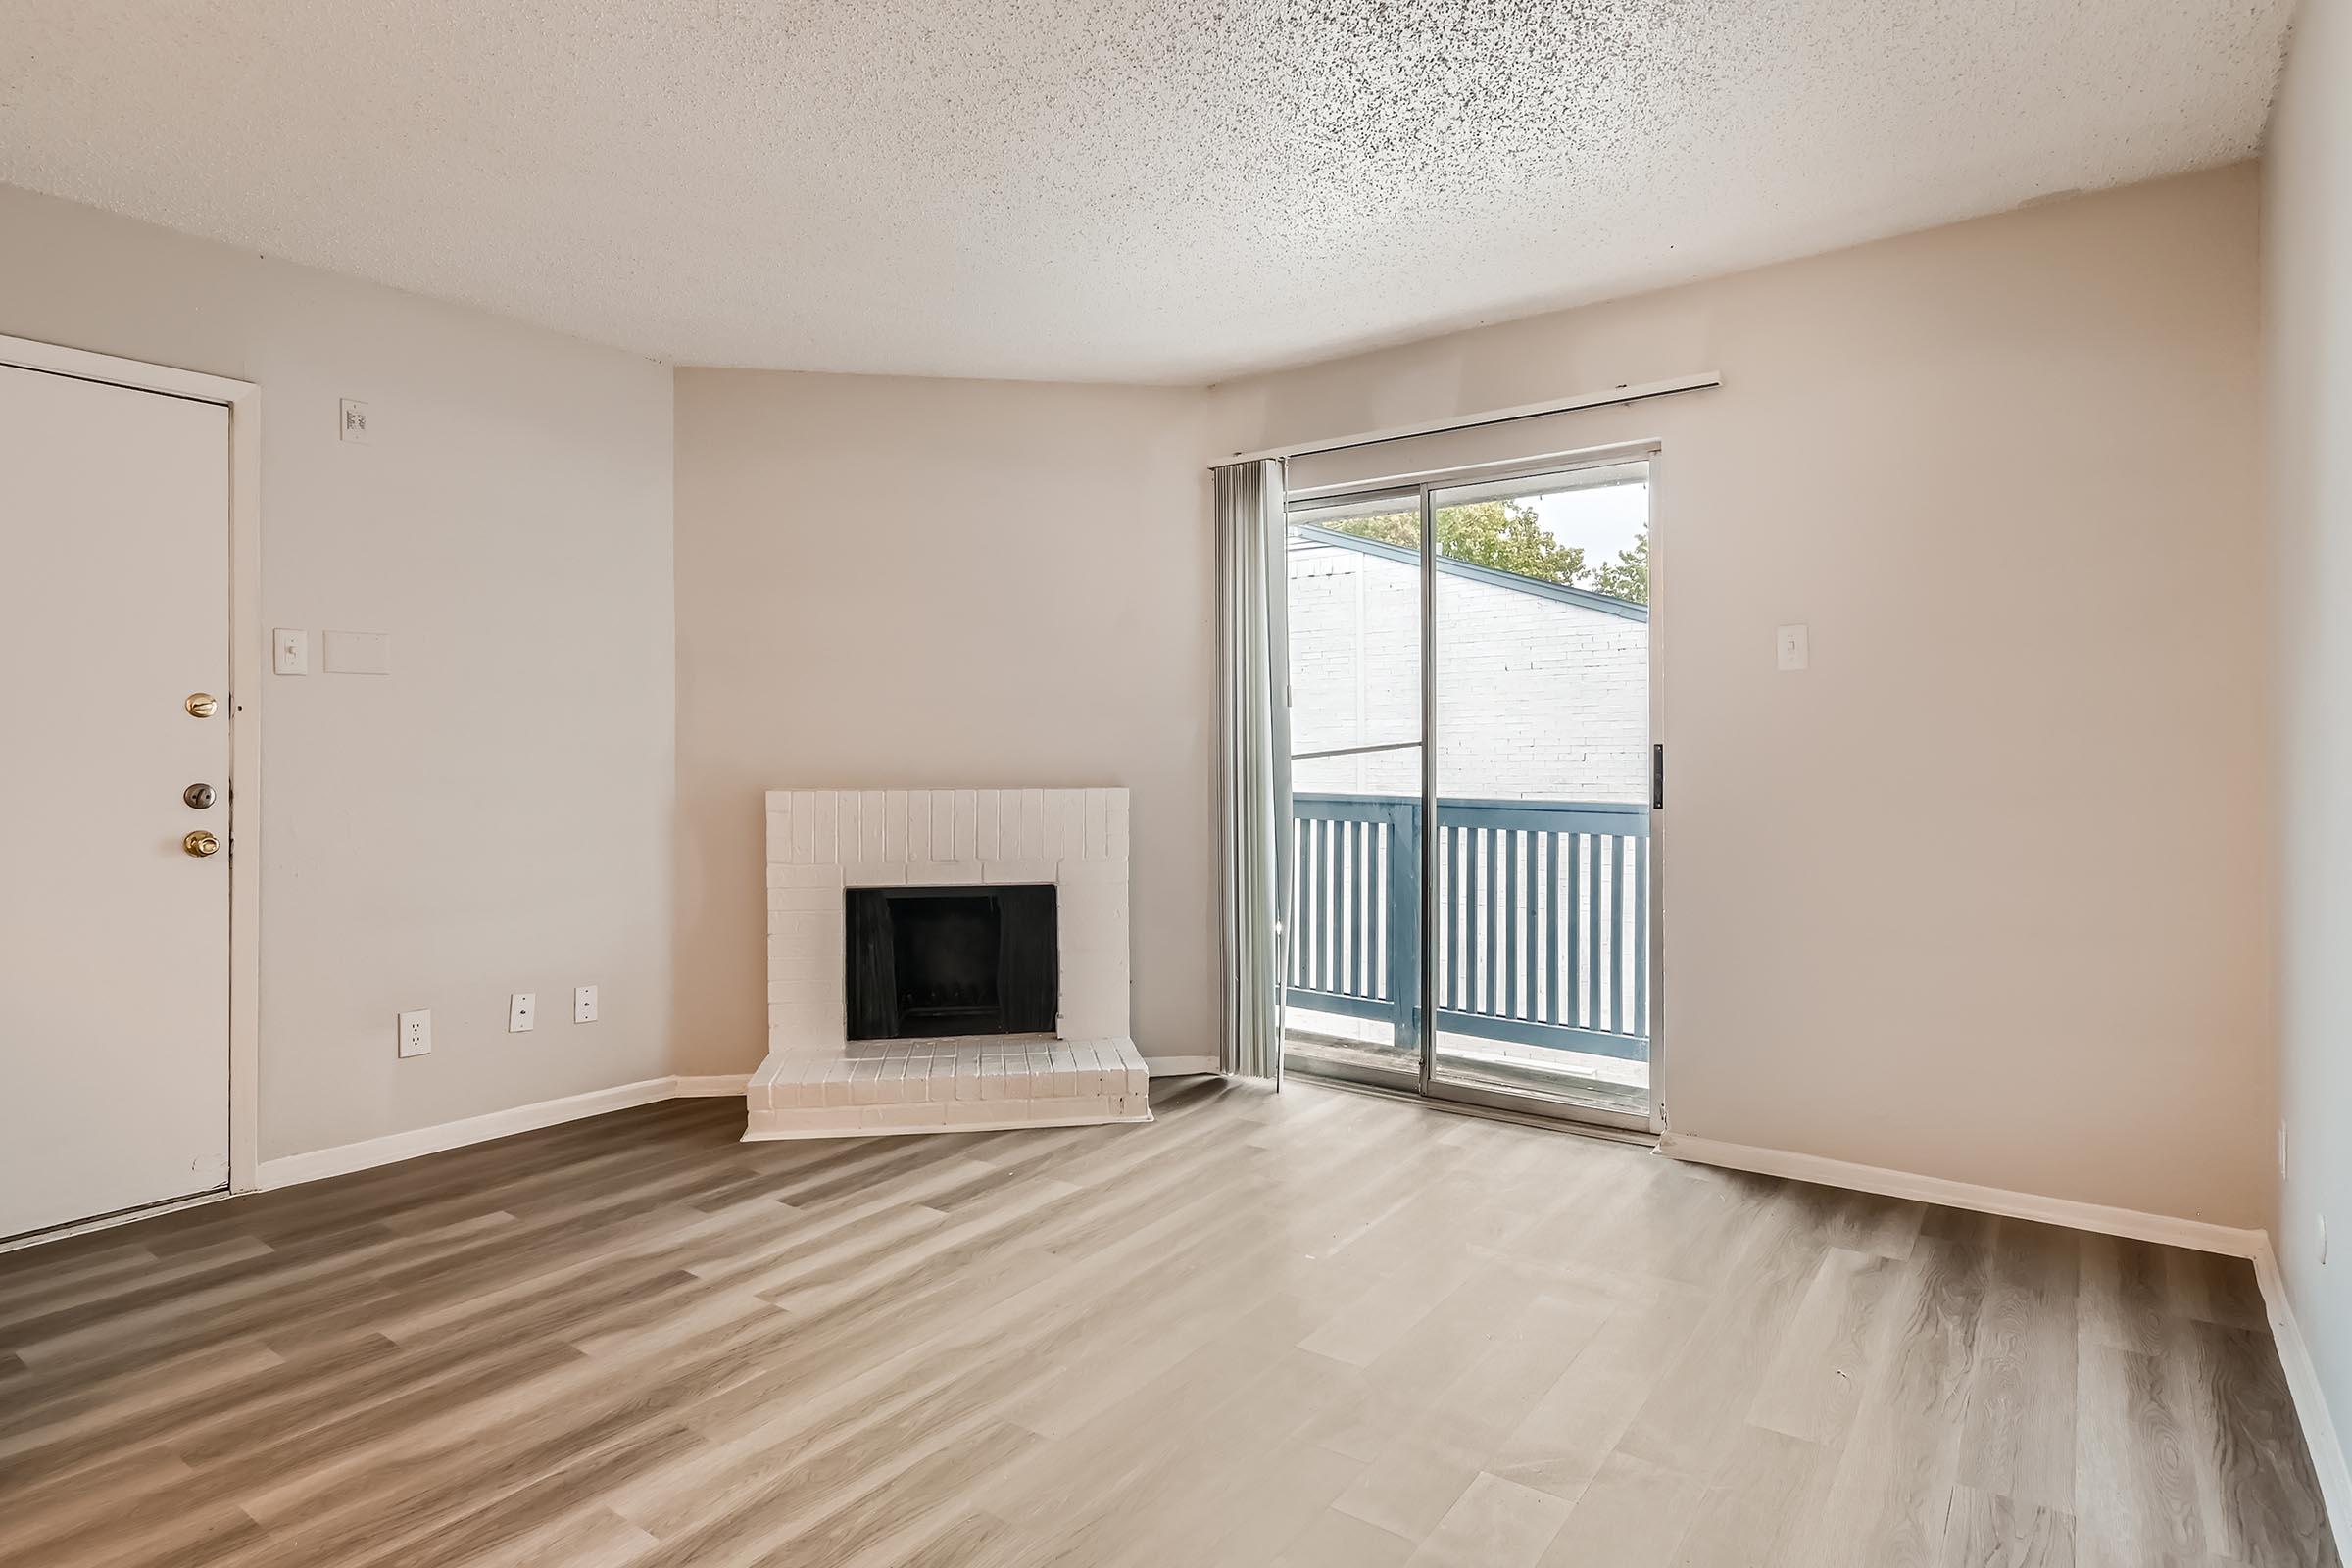 An apartment living room with wood-style floors, a fireplace, and glass sliding doors leading to the balcony at Rise North Arlington.